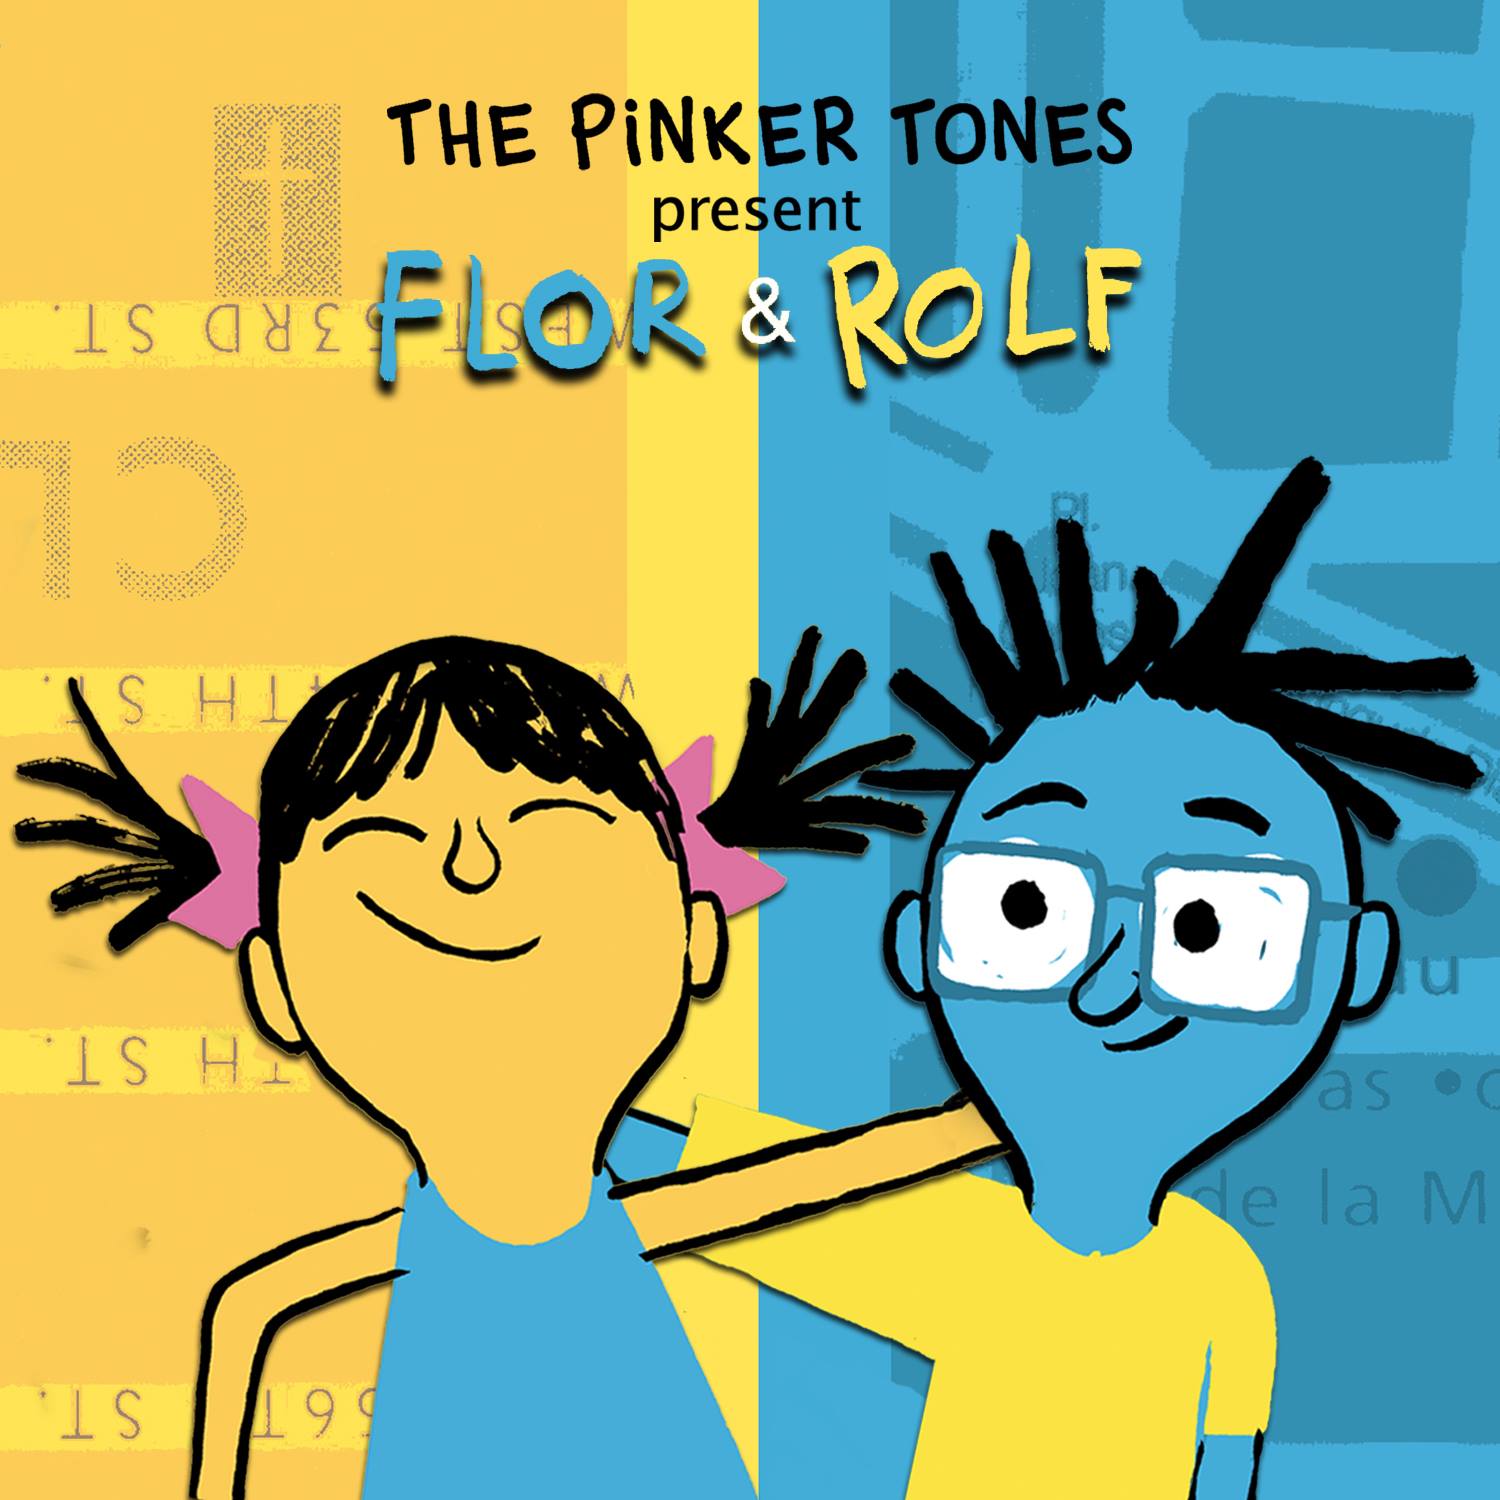 The Pinker Tones' latest record and storybook for children, was featured at a LAMC event.